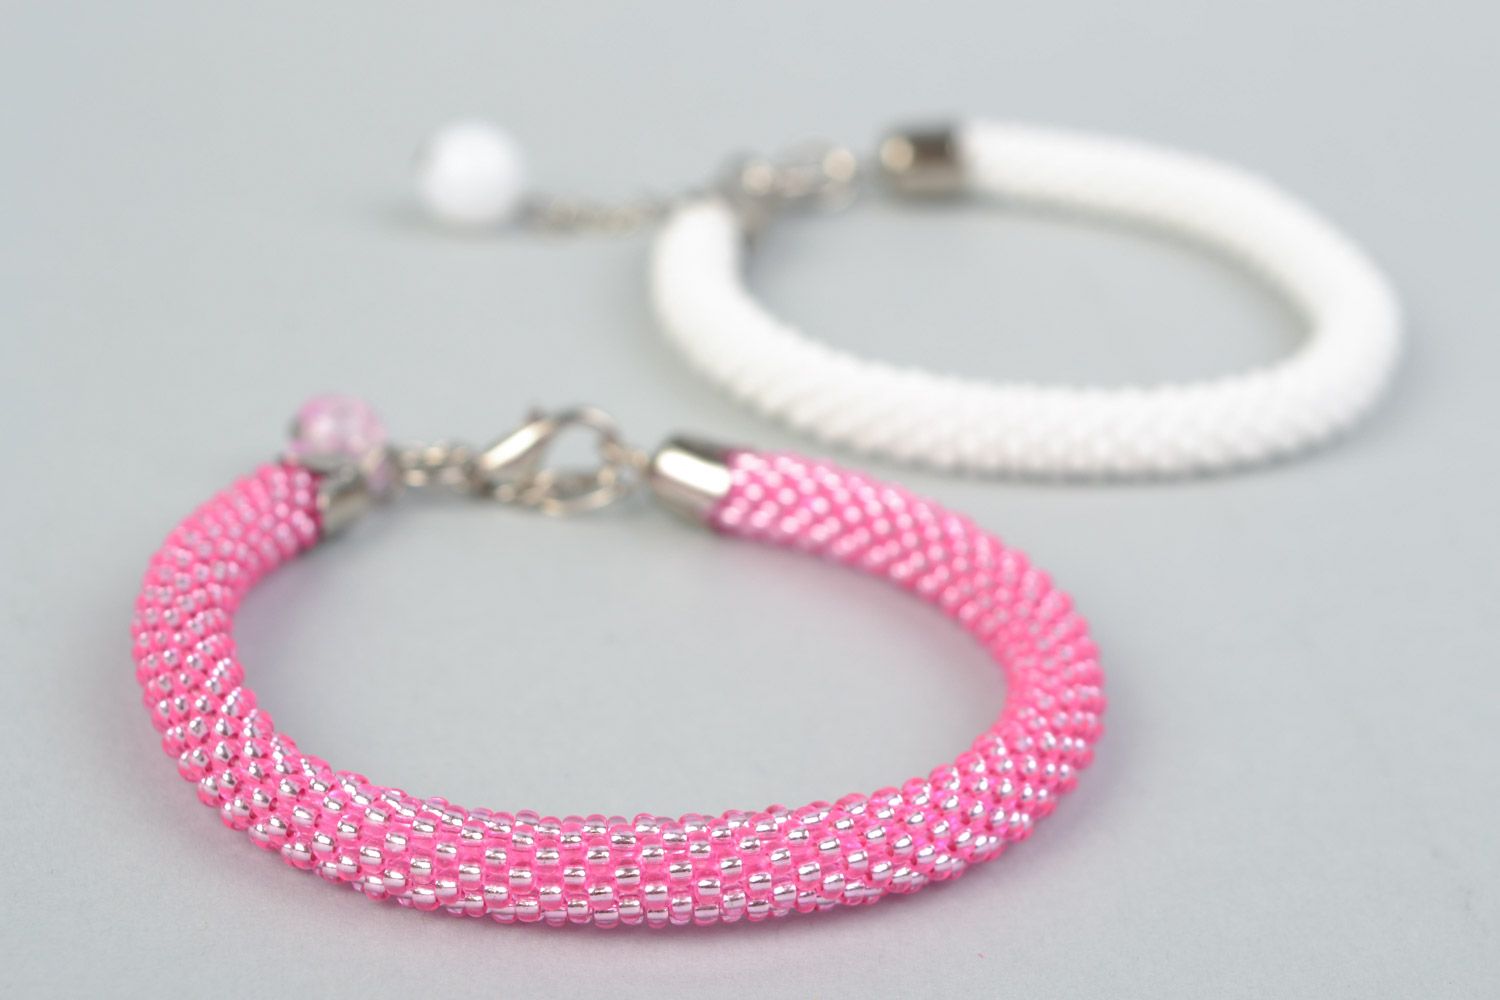 Set of 2 handmade beaded cord women's wrist bracelets in pink and white colors photo 3